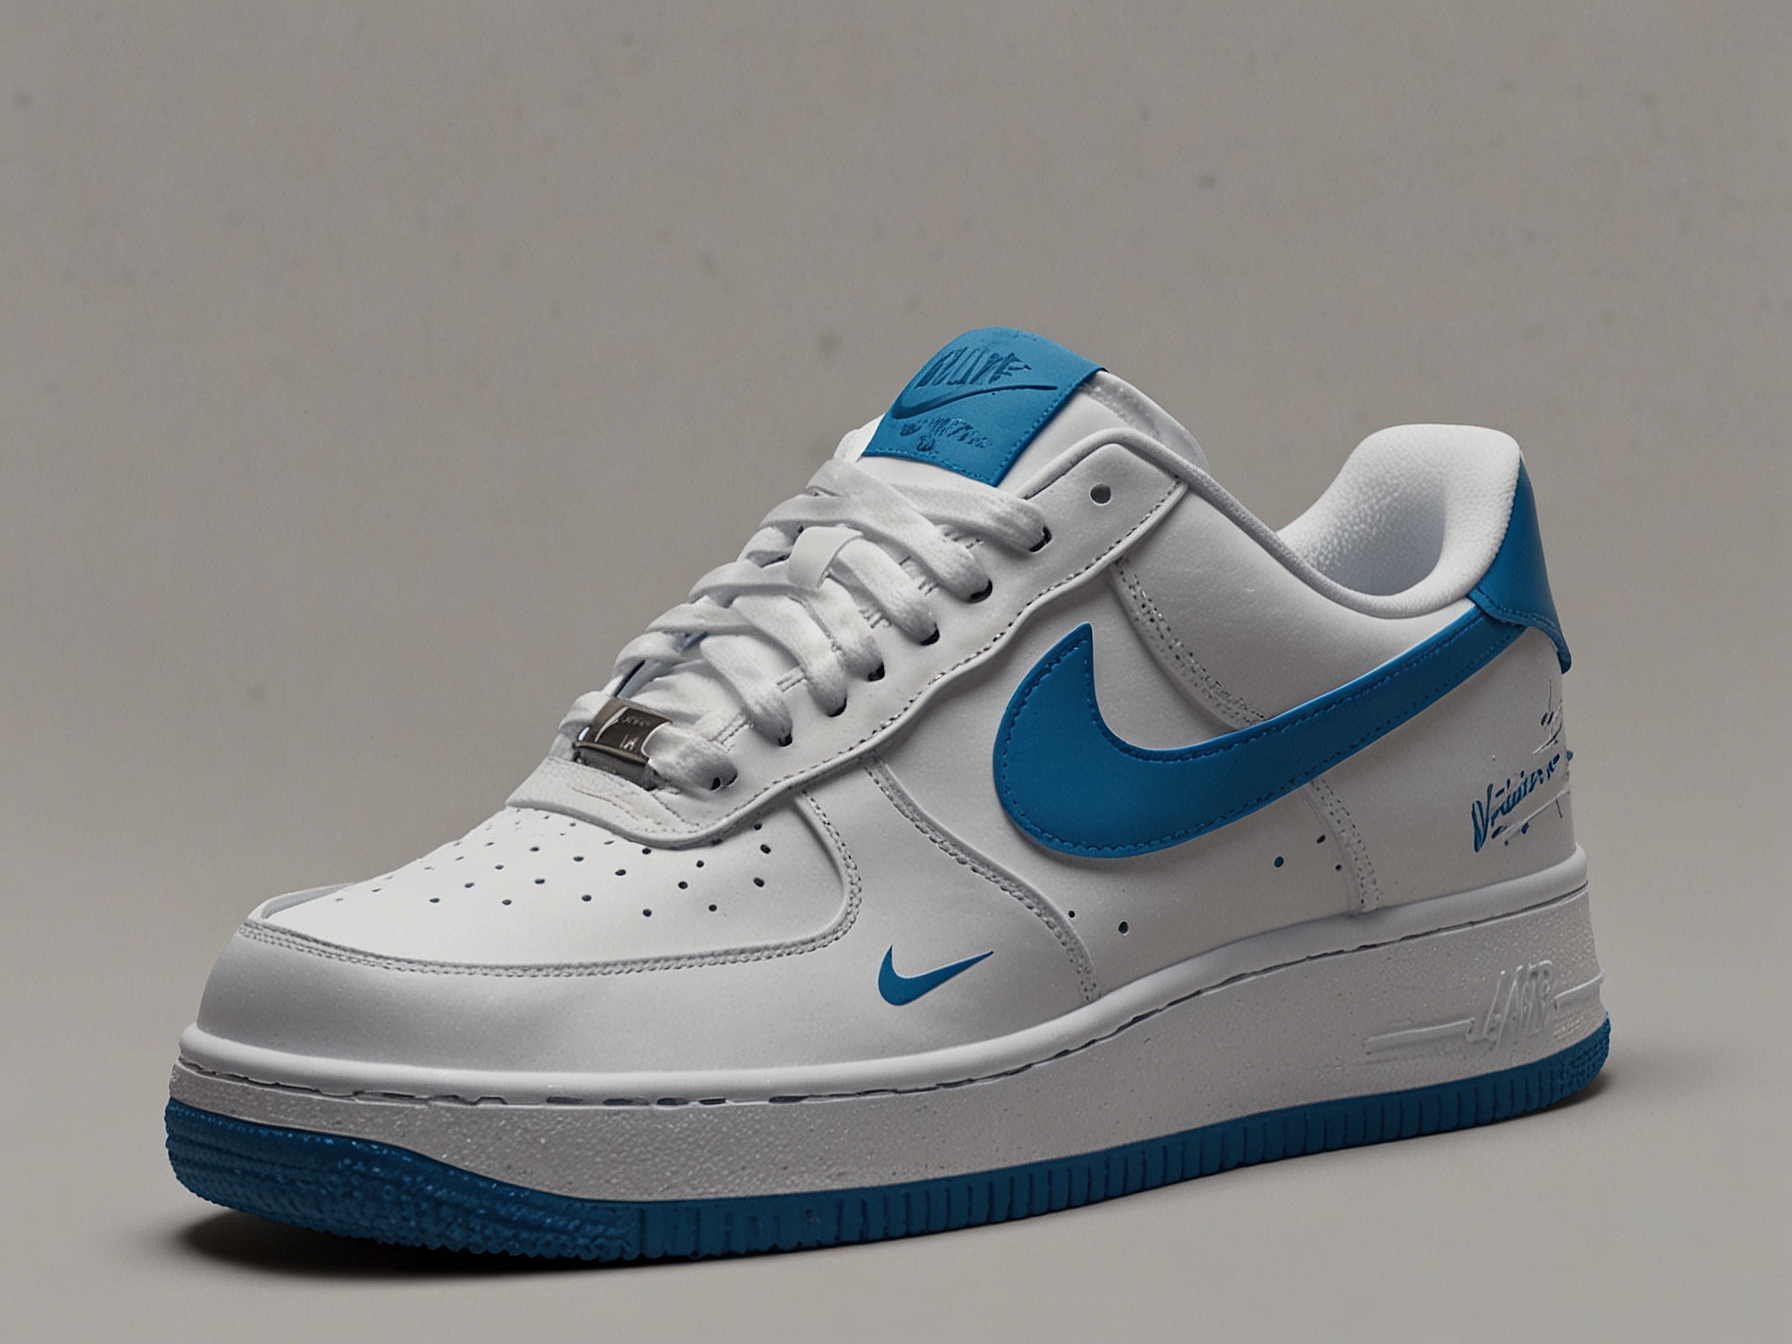 A close-up shot of the NOCTA x Nike Air Force 1 Low in 'White/Cobalt Tint', highlighting the white leather upper with baby blue overlays and the sleek Nike swoosh on the side panel.